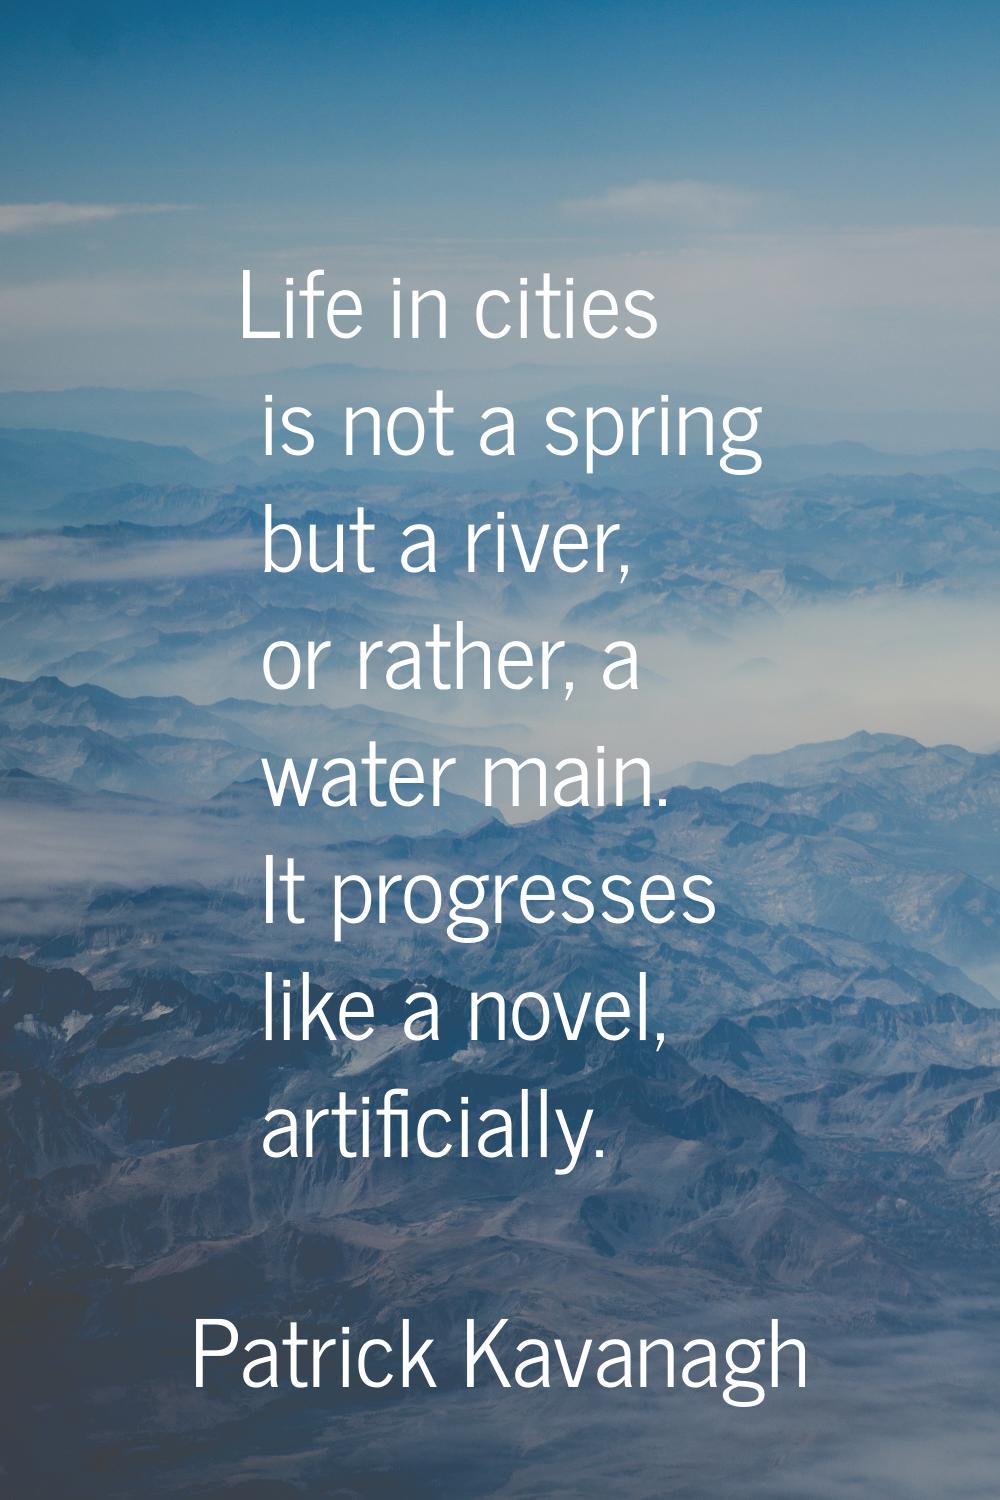 Life in cities is not a spring but a river, or rather, a water main. It progresses like a novel, ar